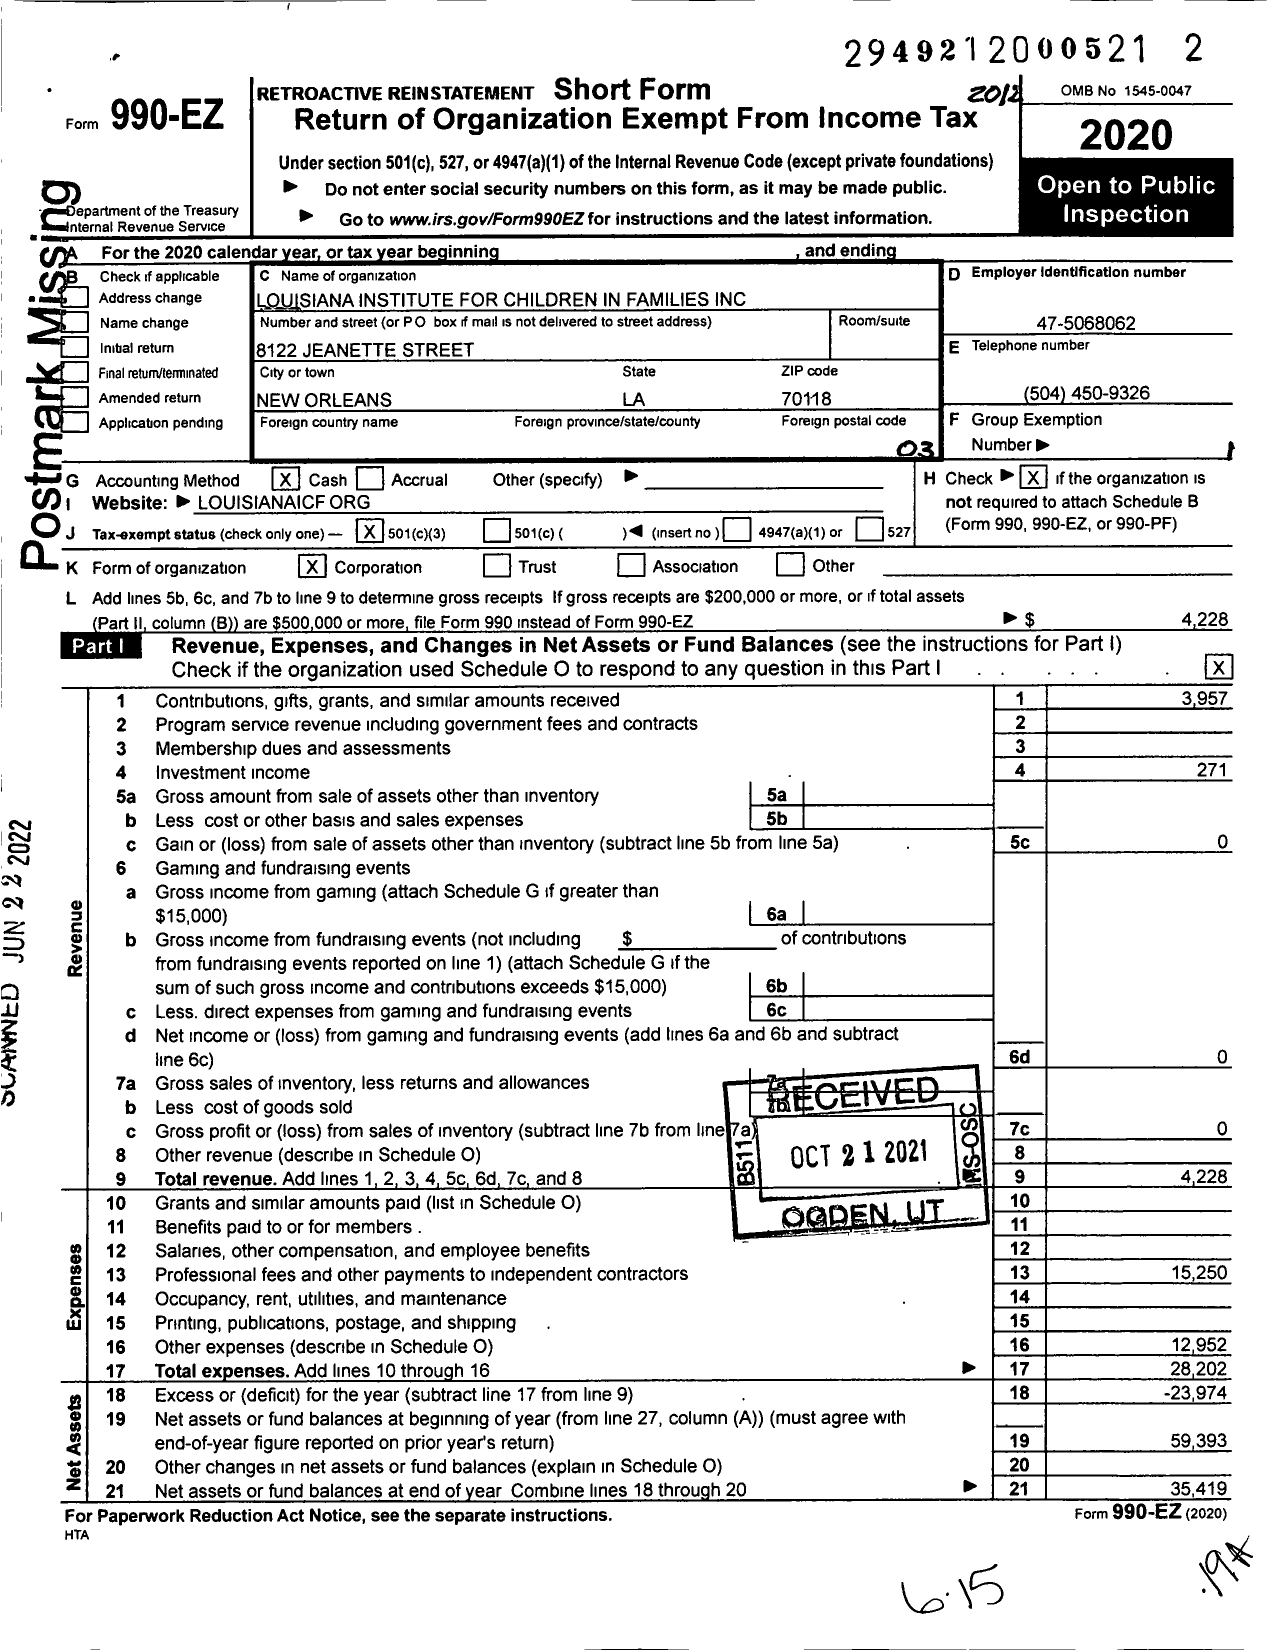 Image of first page of 2020 Form 990EZ for Louisiana Institute for Children in Families